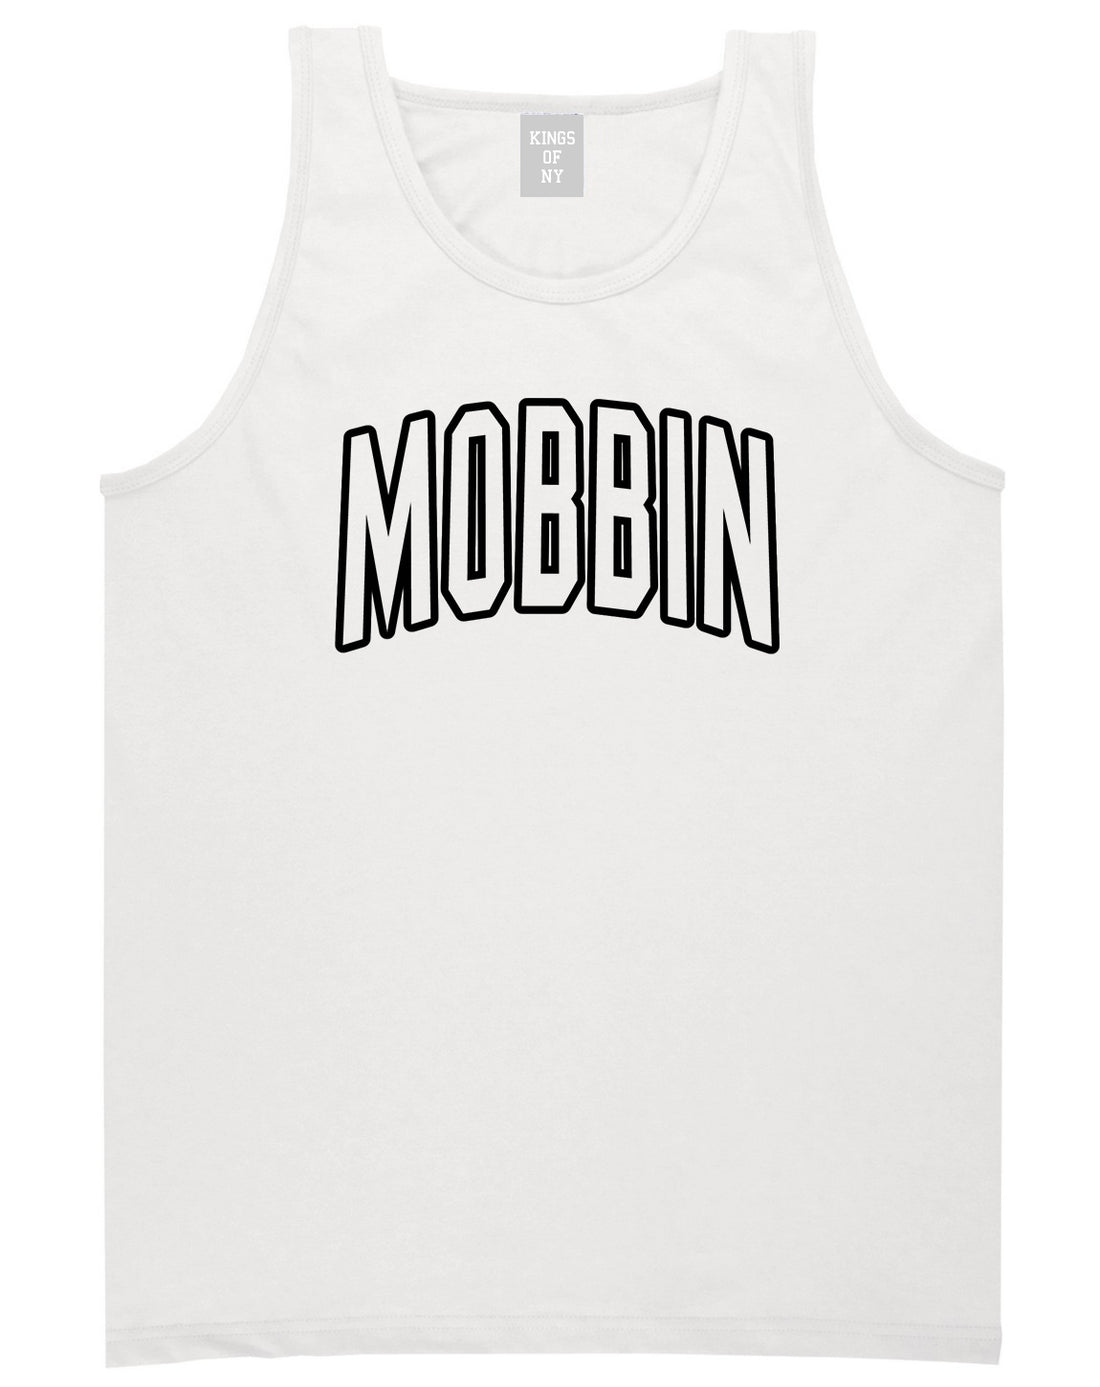 Mobbin Outline Squad Mens Tank Top Shirt White by Kings Of NY